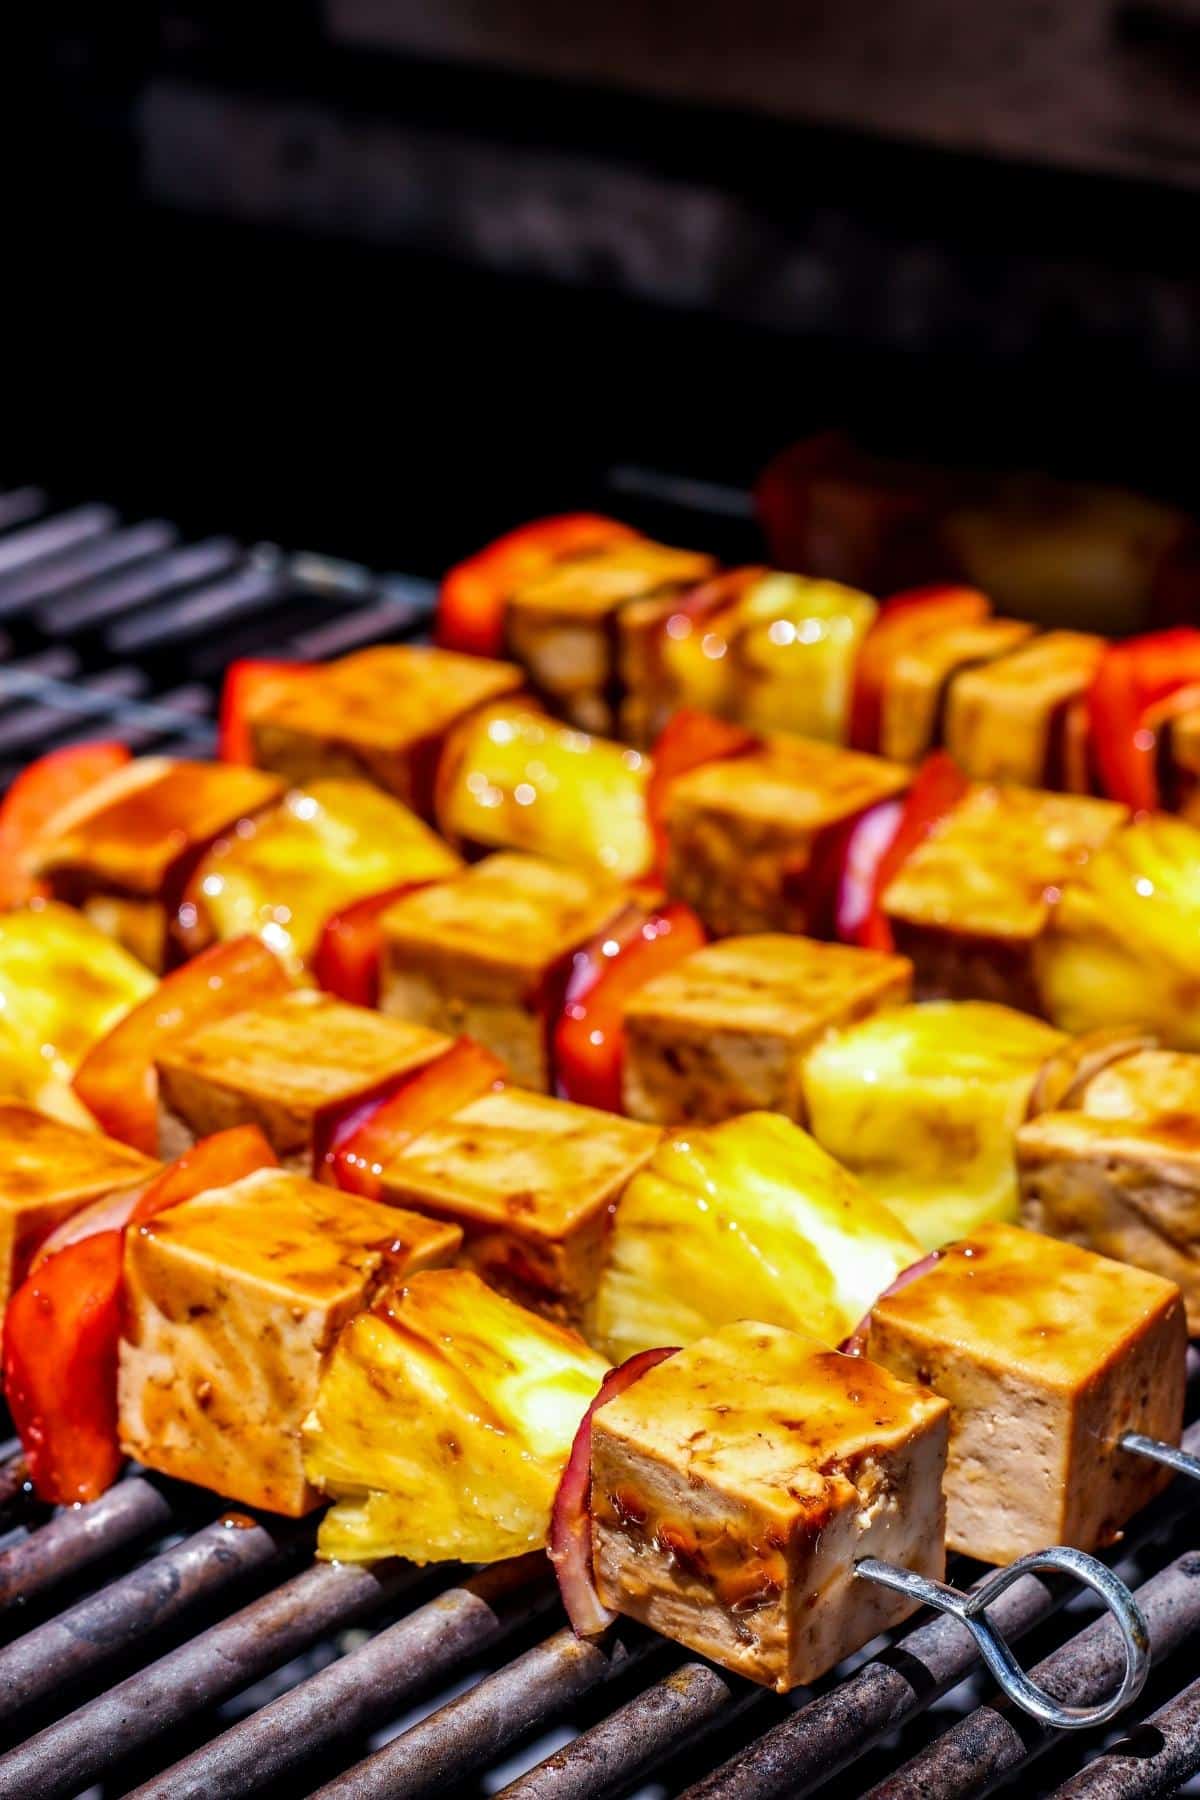 Tofu, pineapple, red bell pepper, and onion on metal skewers cooking on a barbecue grill.